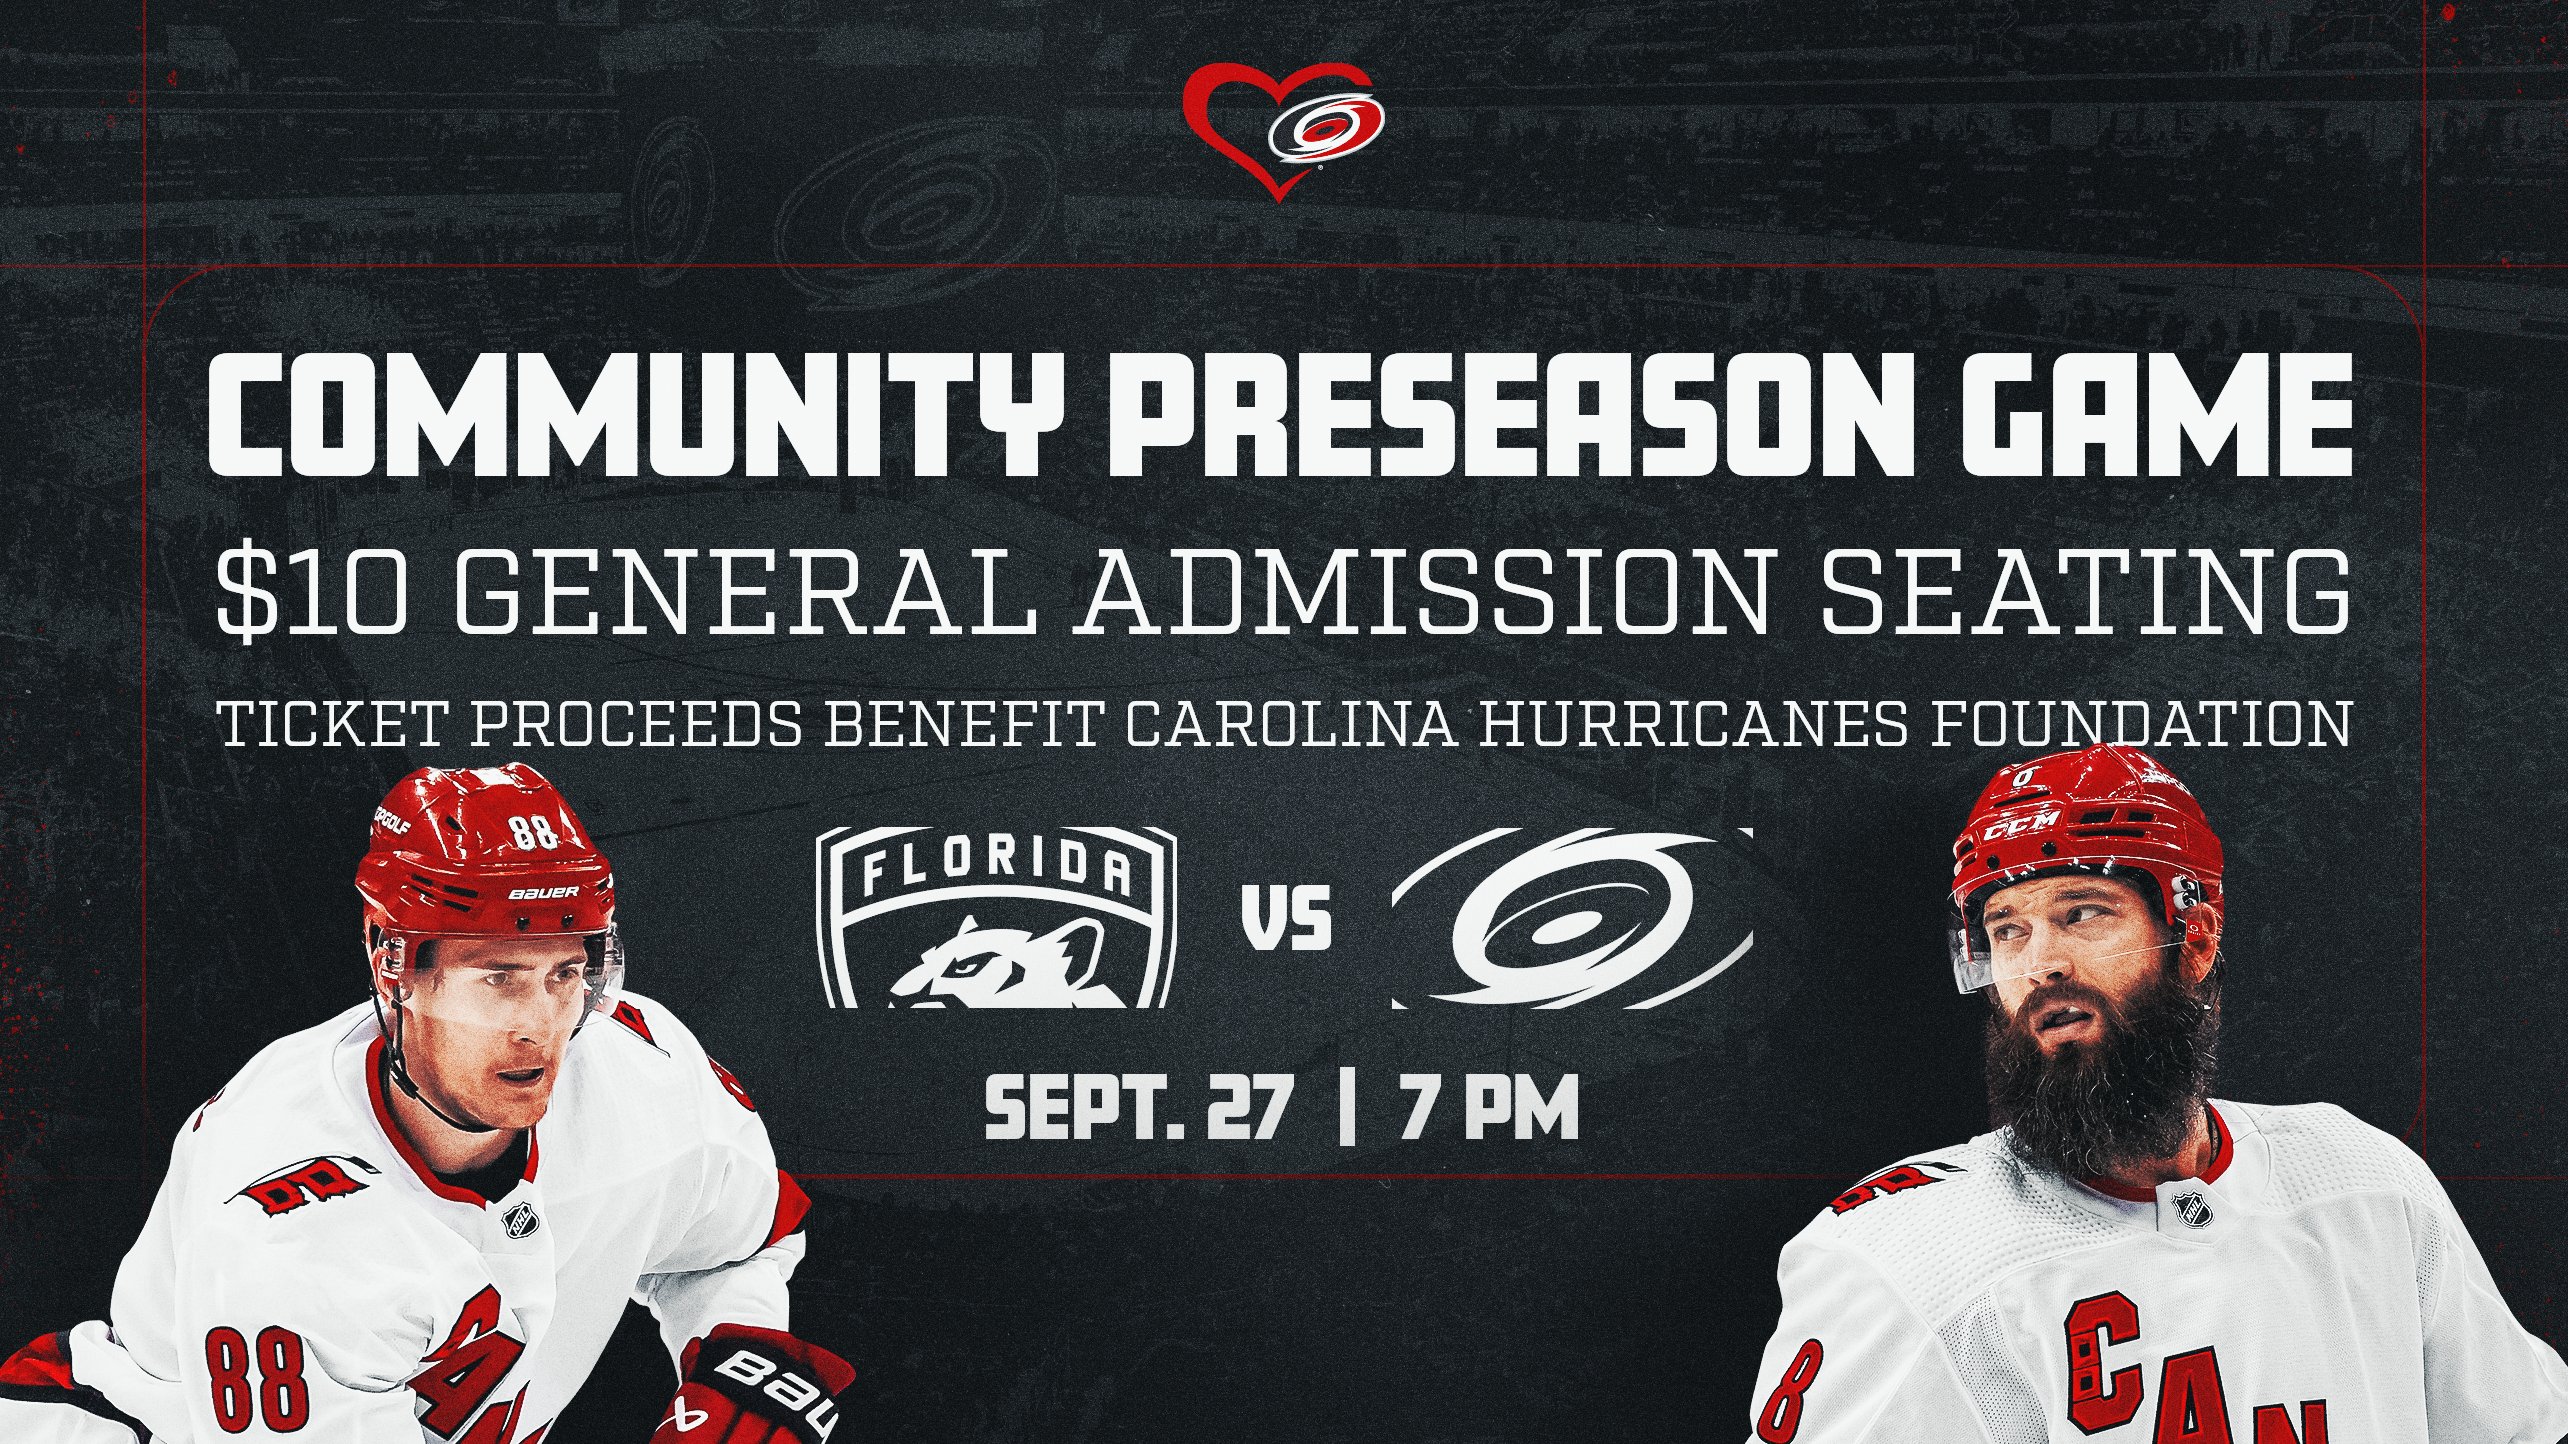 Carolina Hurricanes on X: All the prizes! Now's your chance to